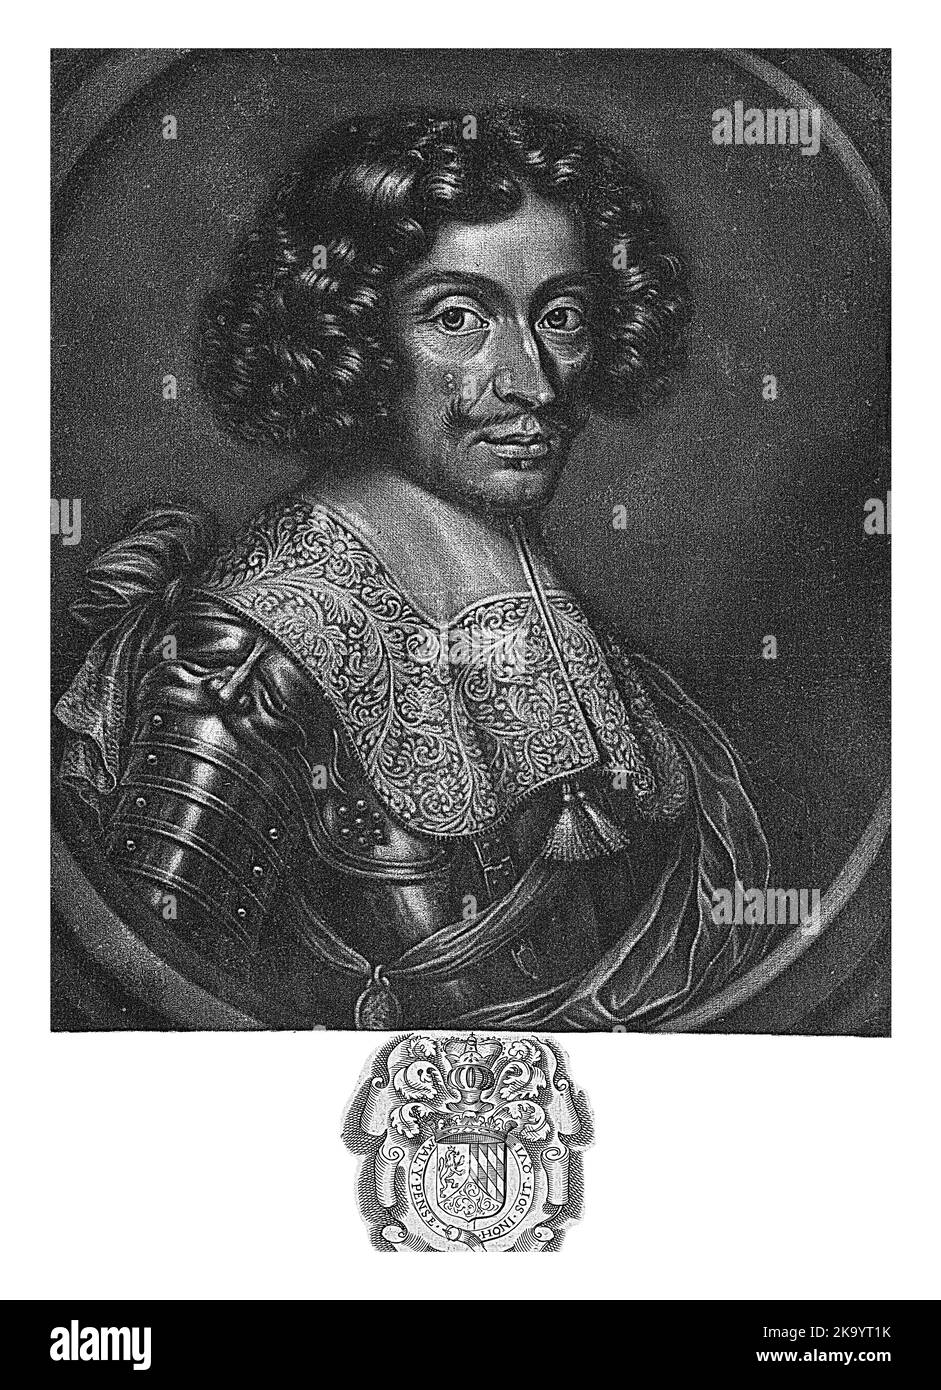 Karel Lodewijk, Elector of the Pals. He wears a harness and a flat collar. At the bottom in the margin are family crest, name and titles. Stock Photo